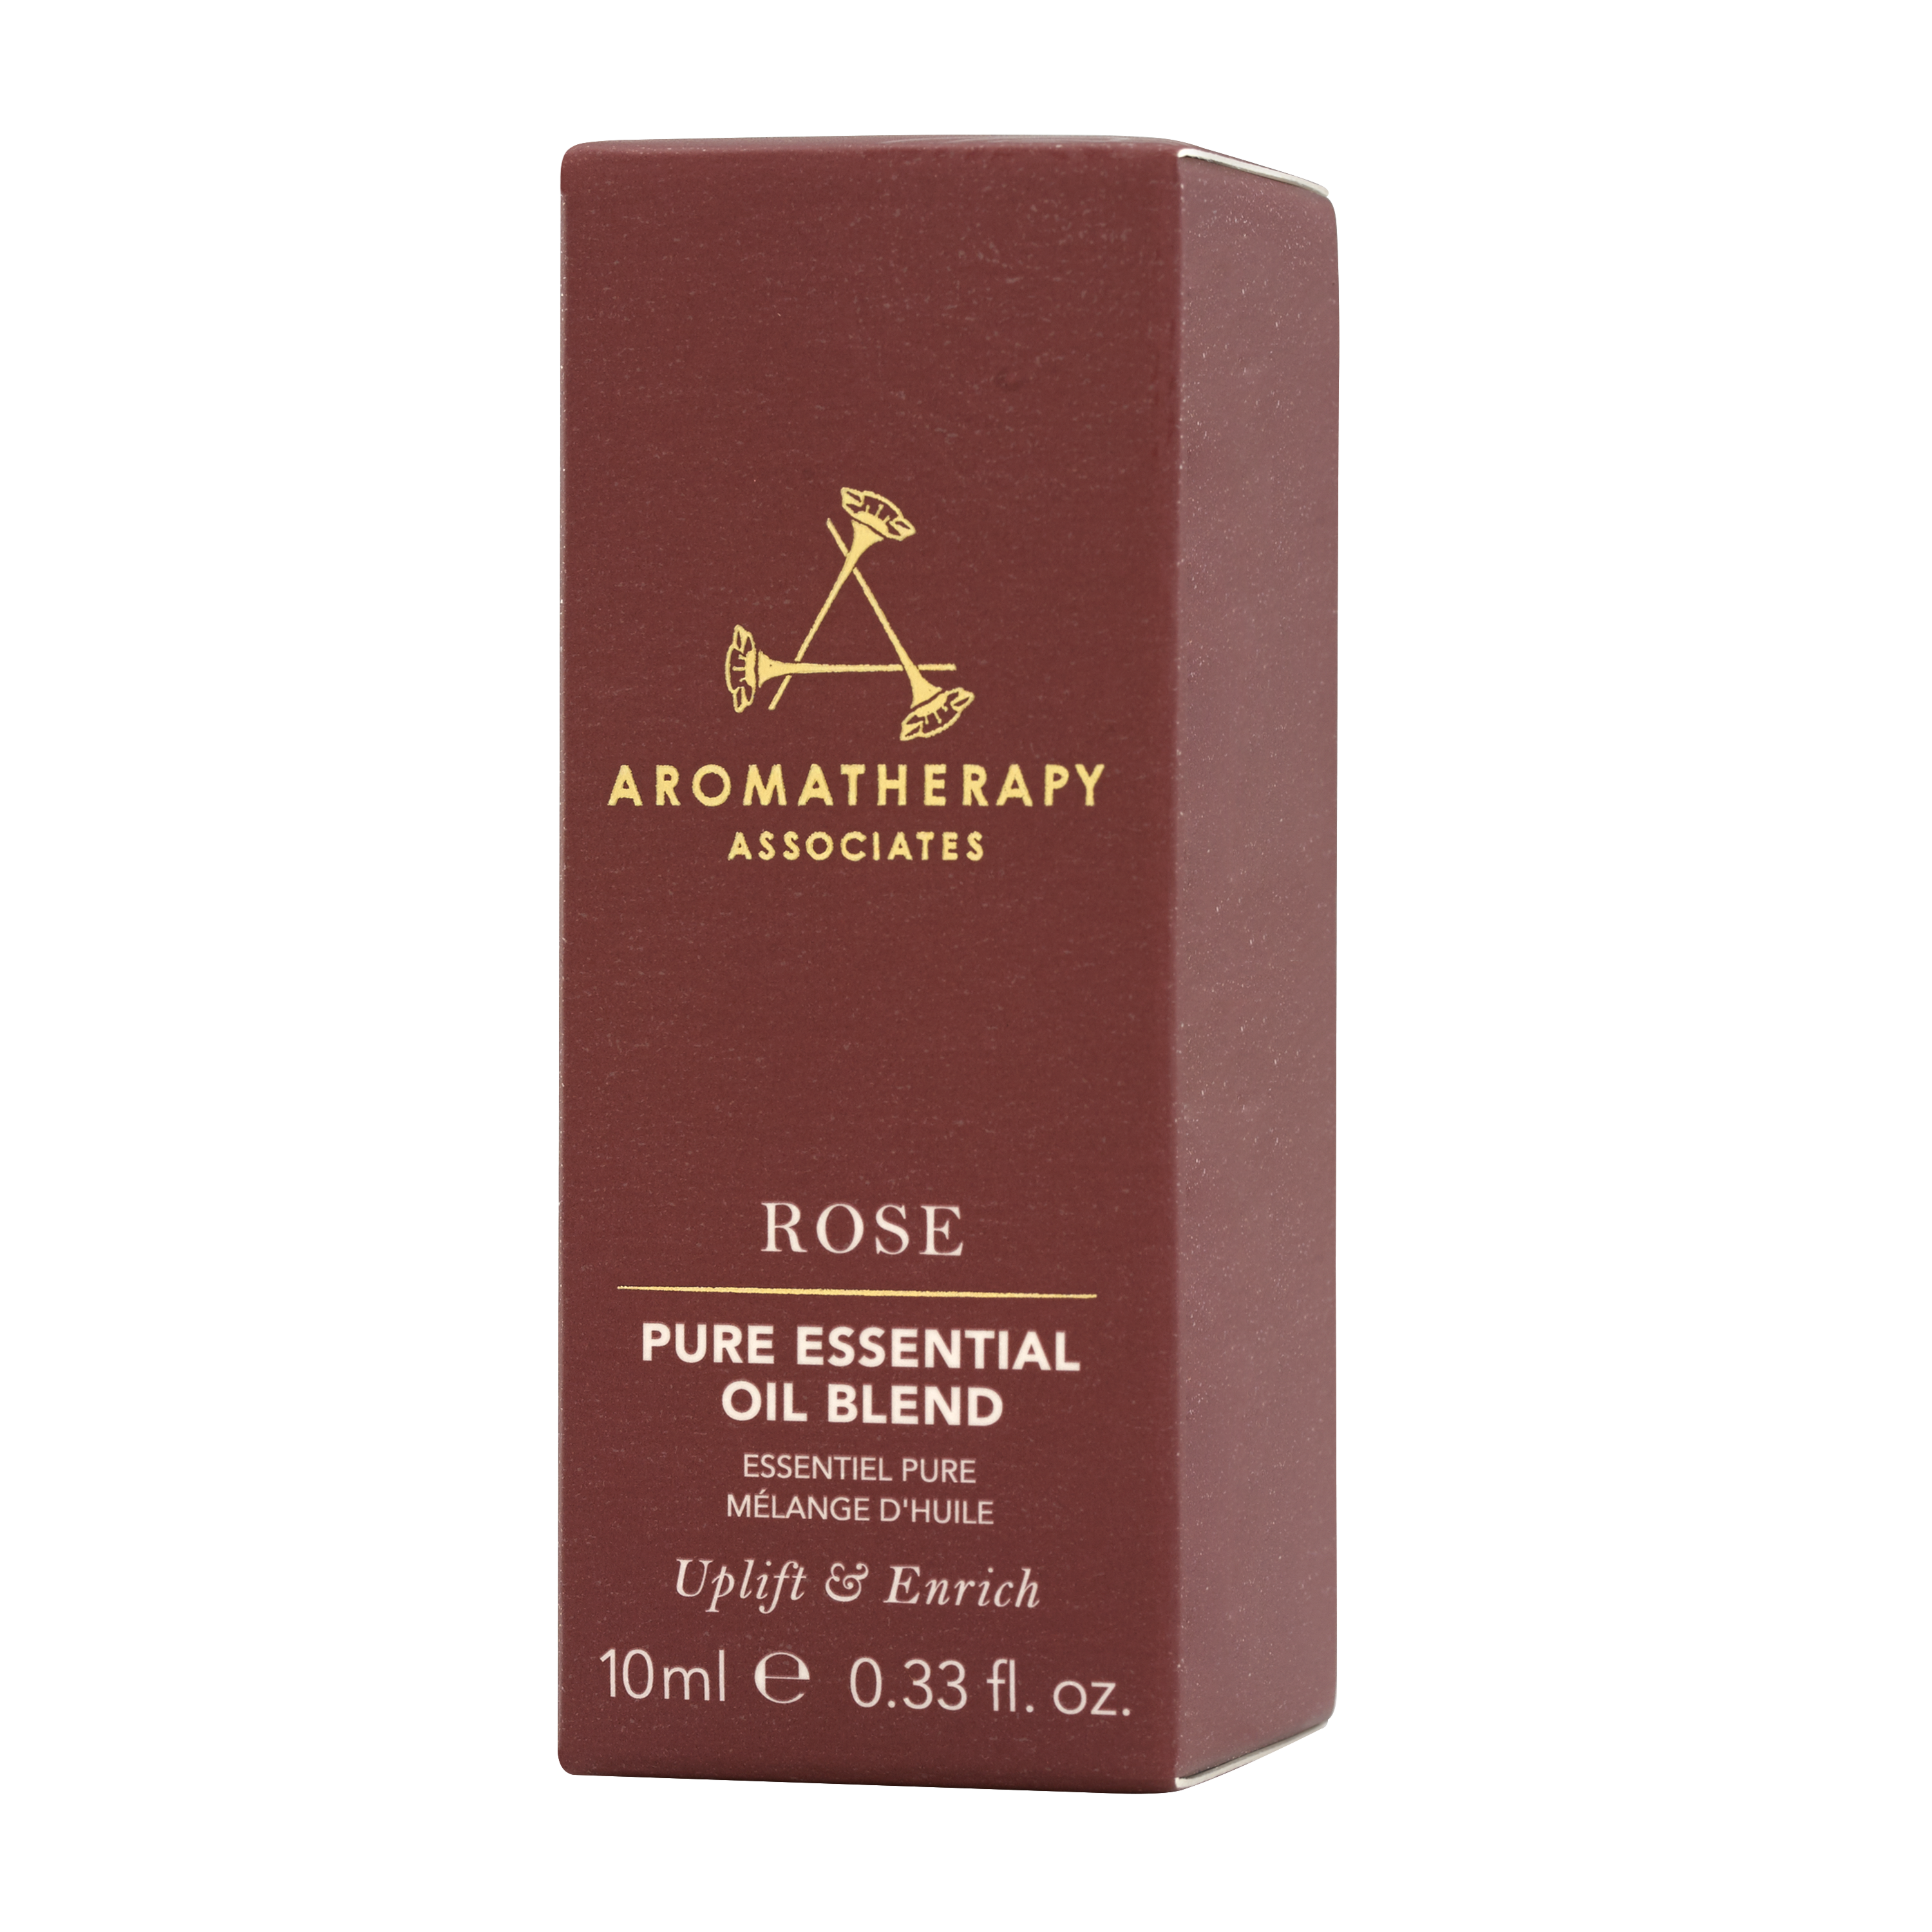 Rose Pure Essential Oil Blend Aromatherapy Associates